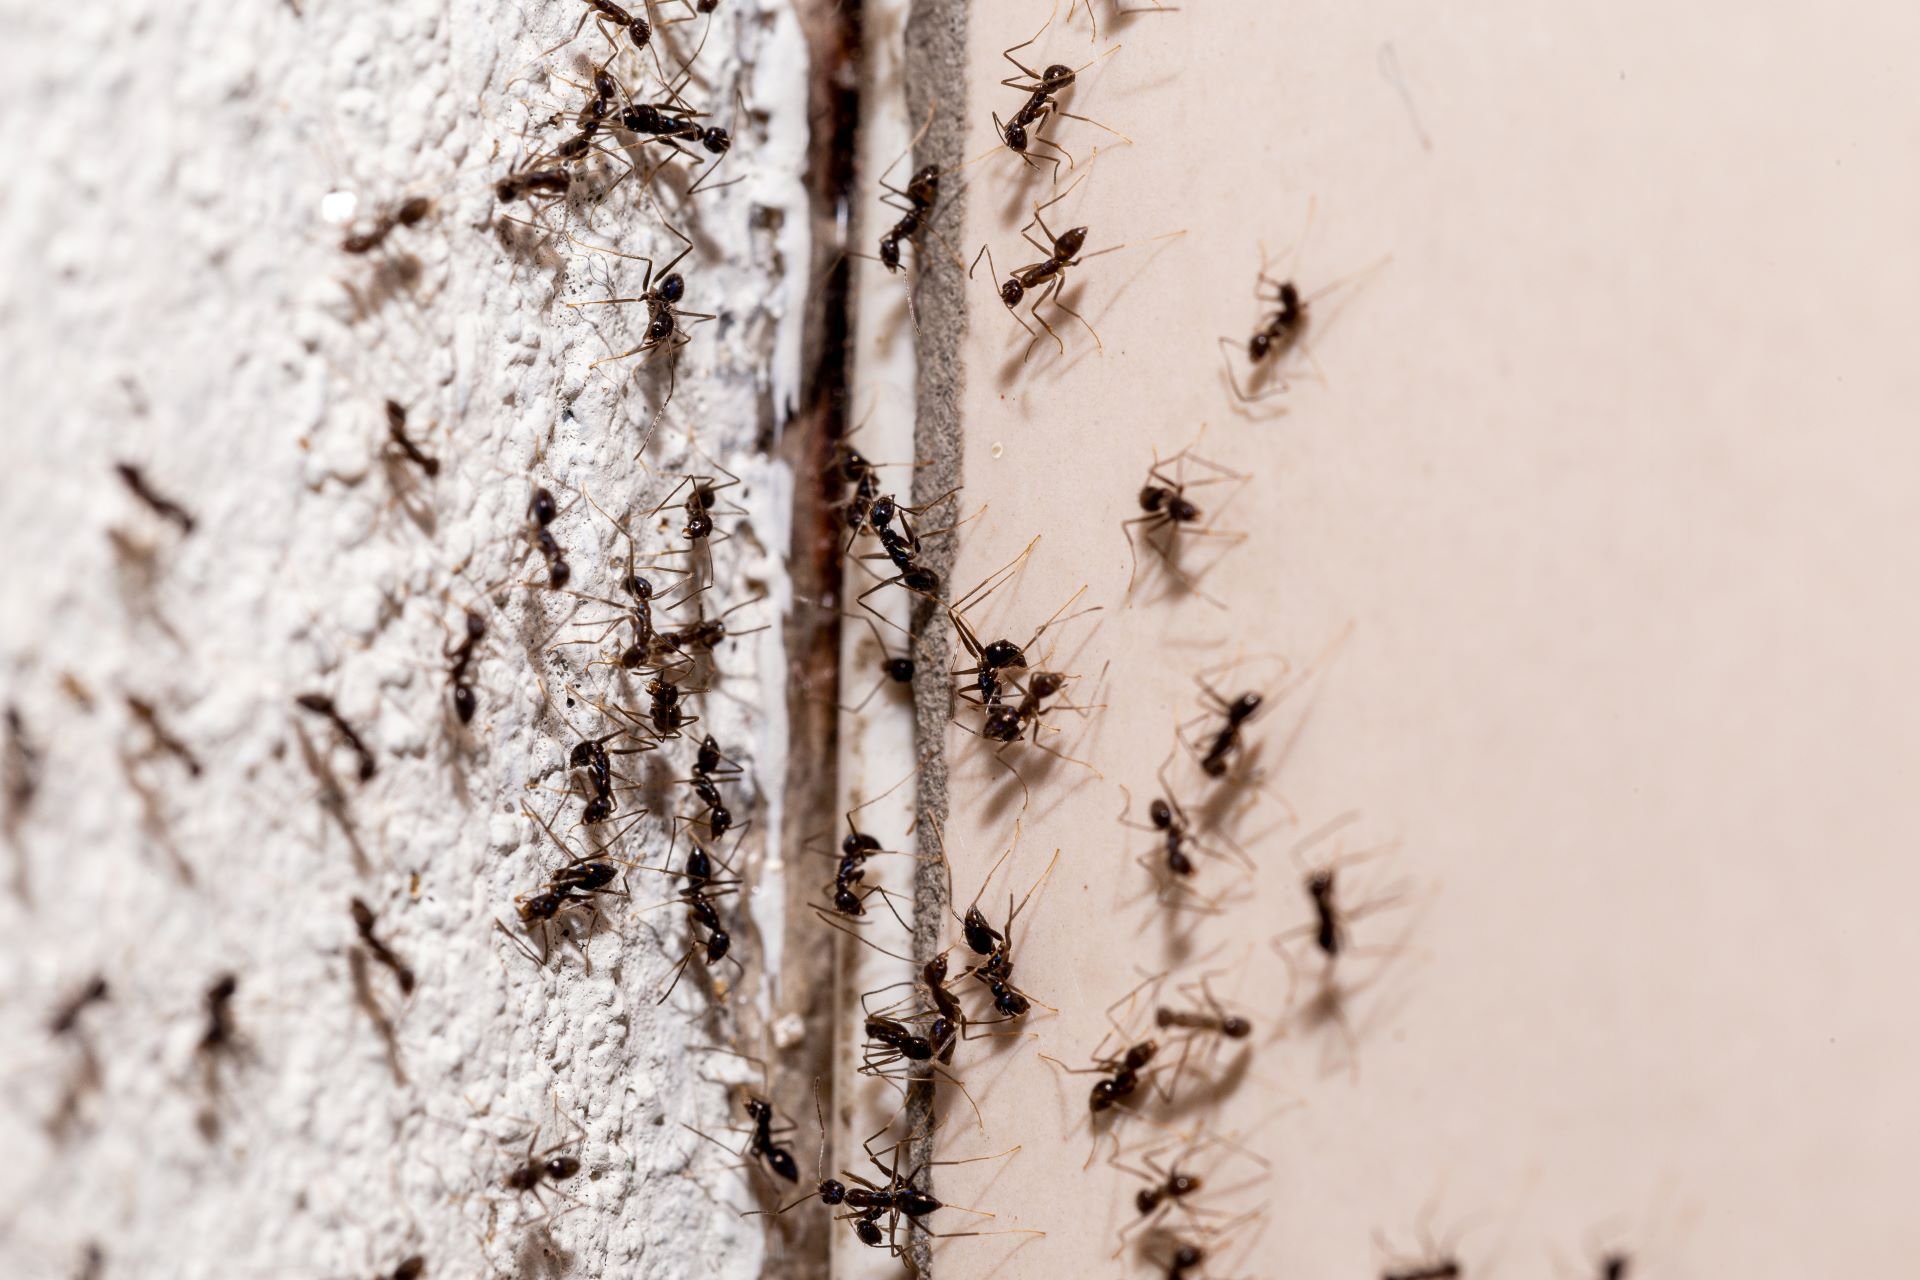 bugs-wall-coming-out-through-crack-wall-sweet-ant-infestation-indoors2